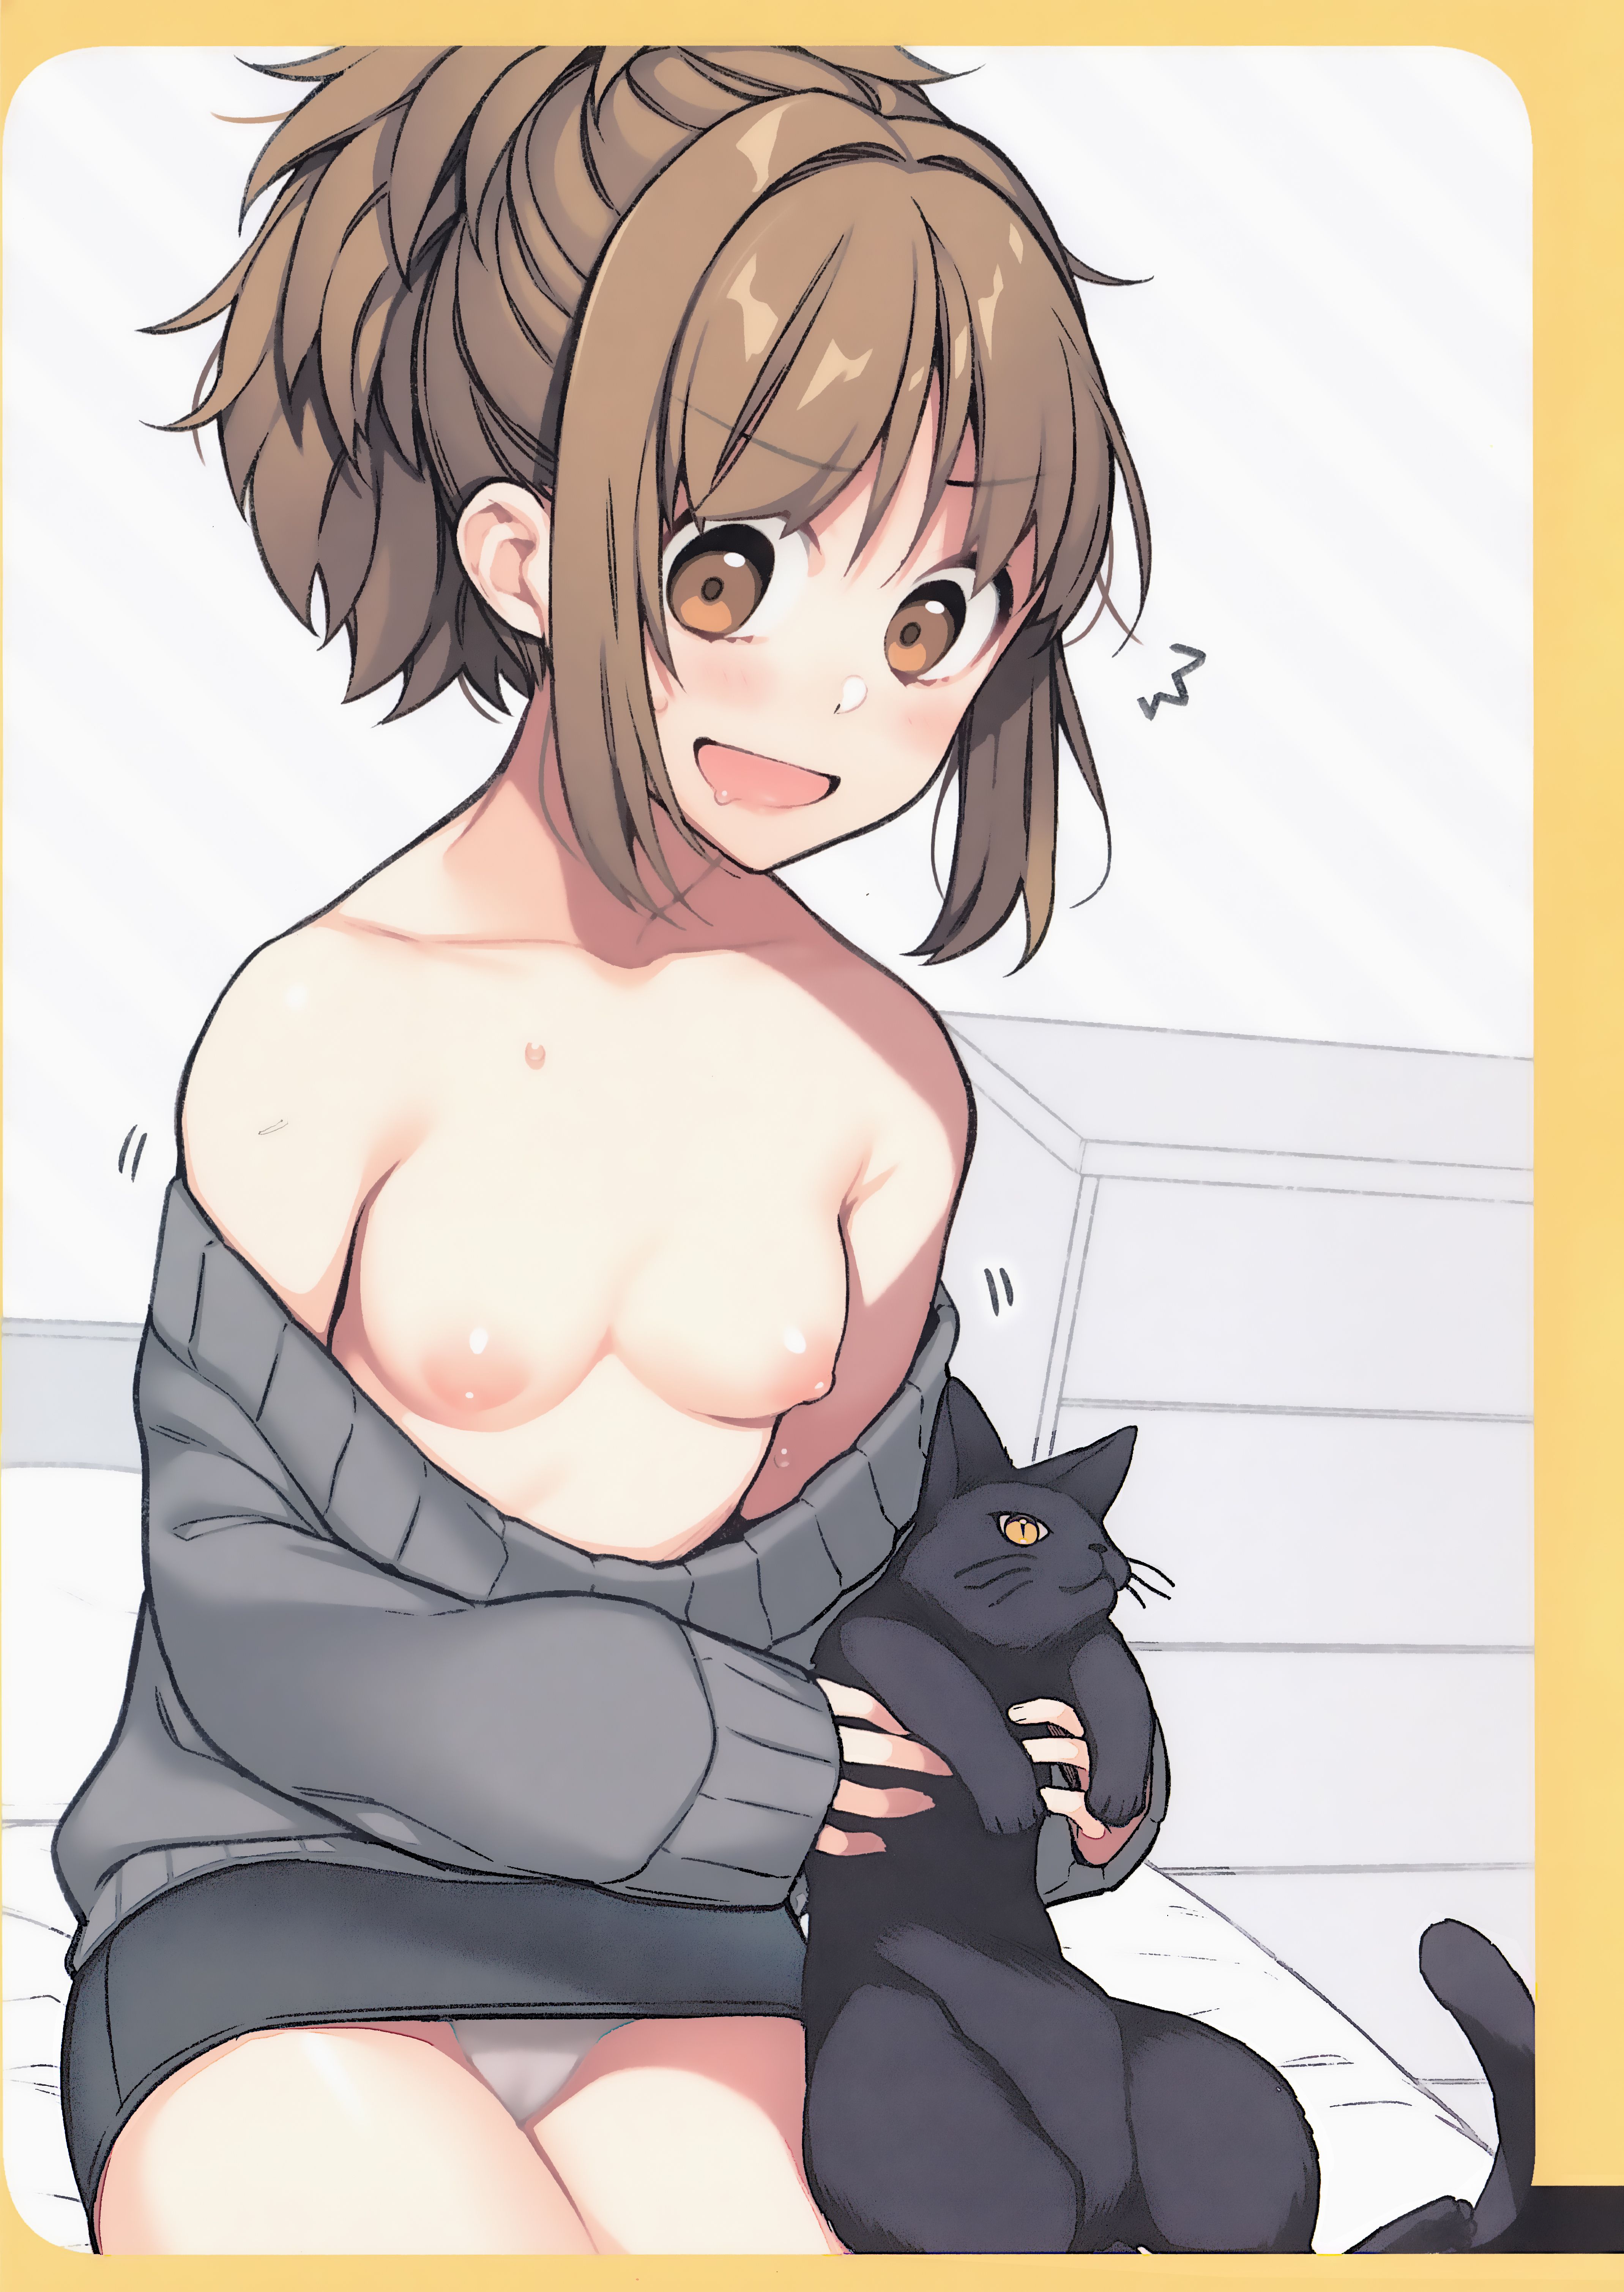 【Erotic Anime Summary】 Erotic images of beautiful girls with beautiful breasts 【50 photos】 37